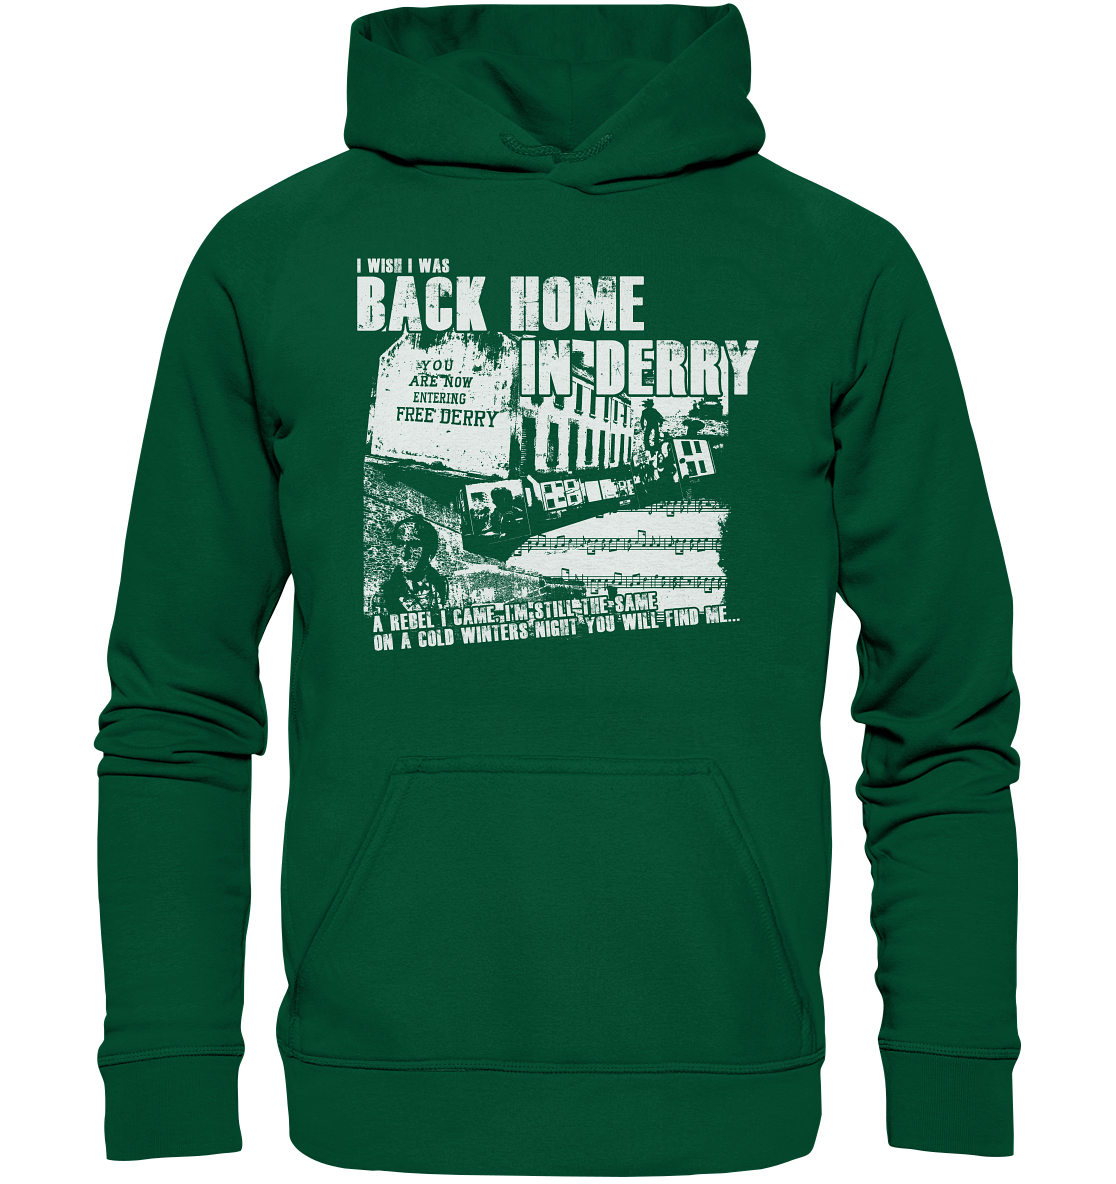 I Wish I Was Back Home In Derry - Basic Unisex Hoodie